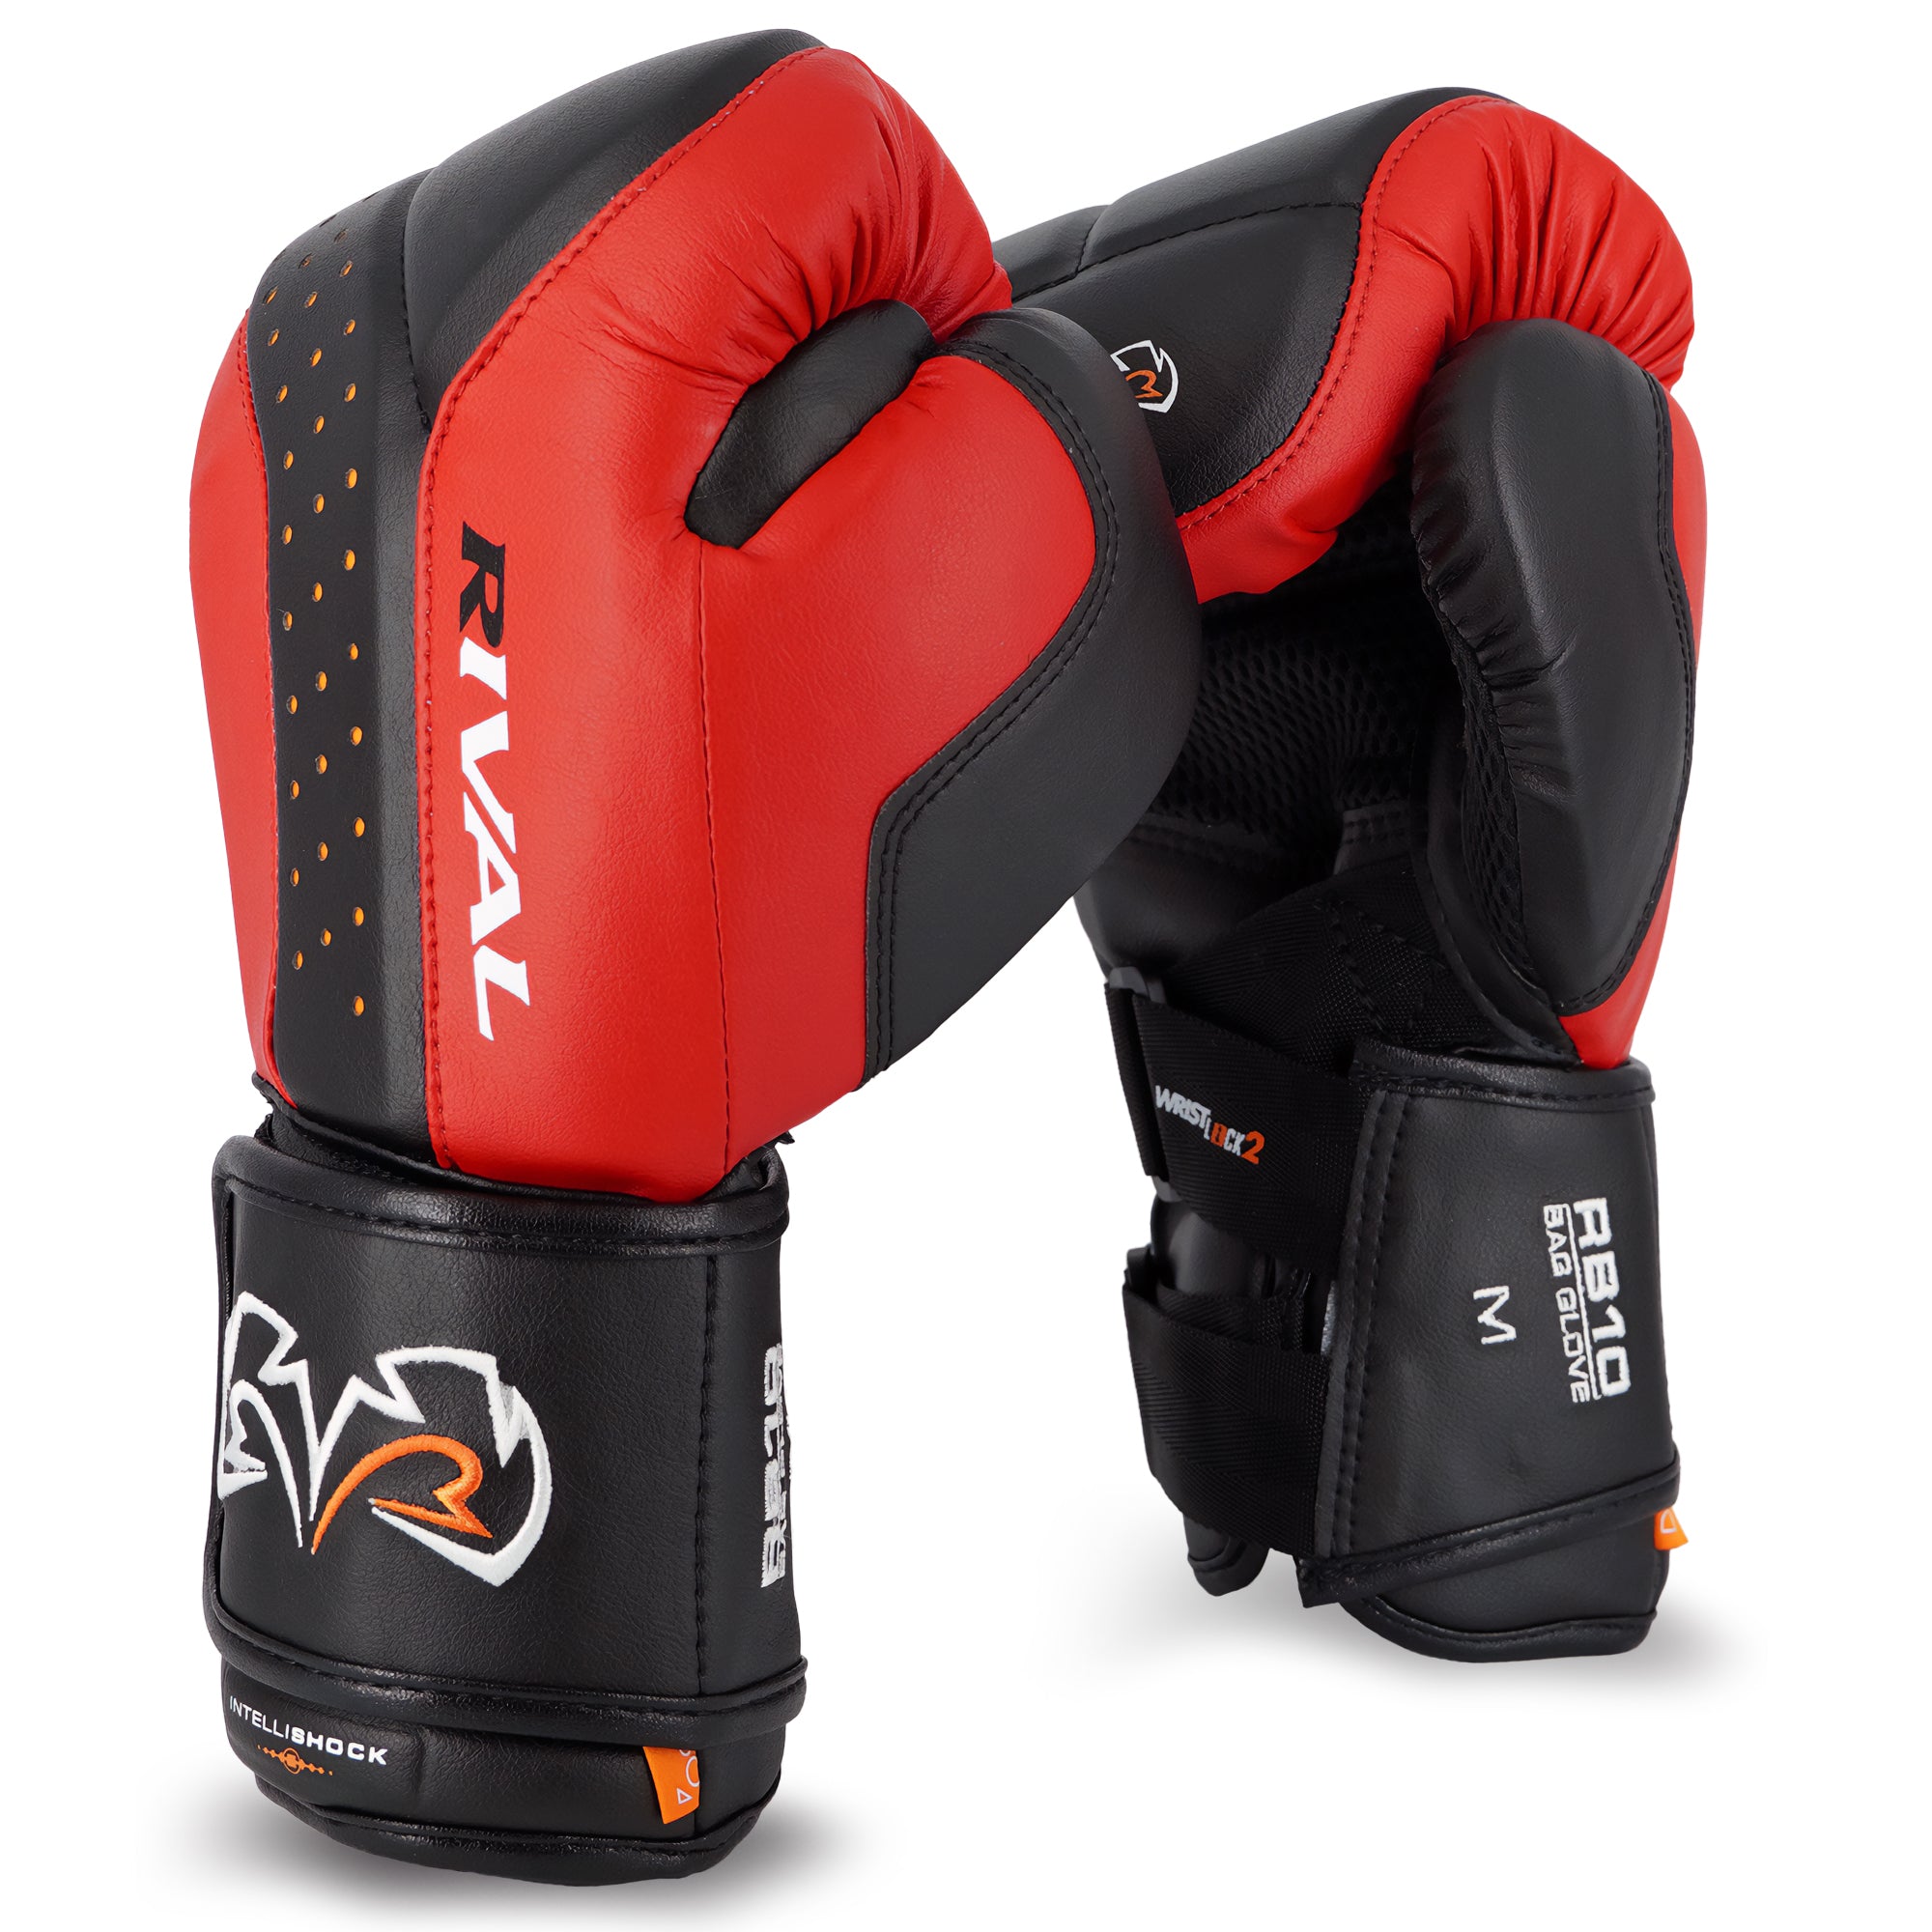 RIVAL Boxing RB10 Intelli-Shock Hook and Loop Bag Gloves RIVAL